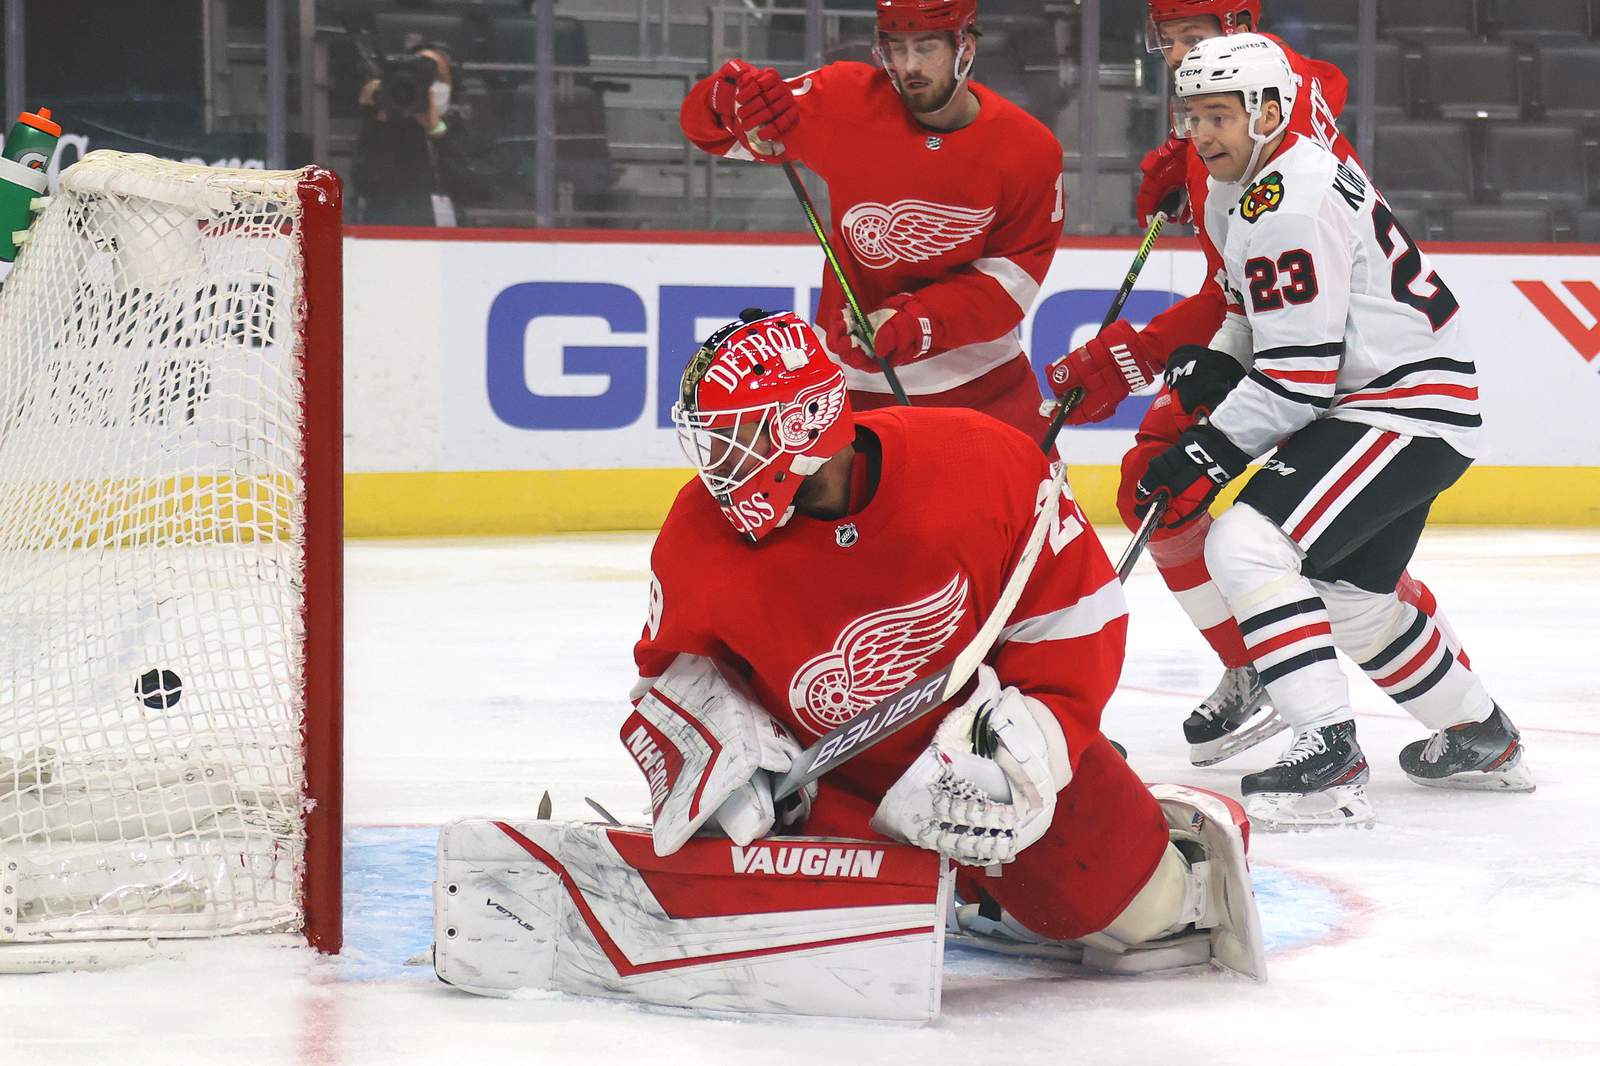 Red Wings lose to Blackhawks, 3-2, in overtime